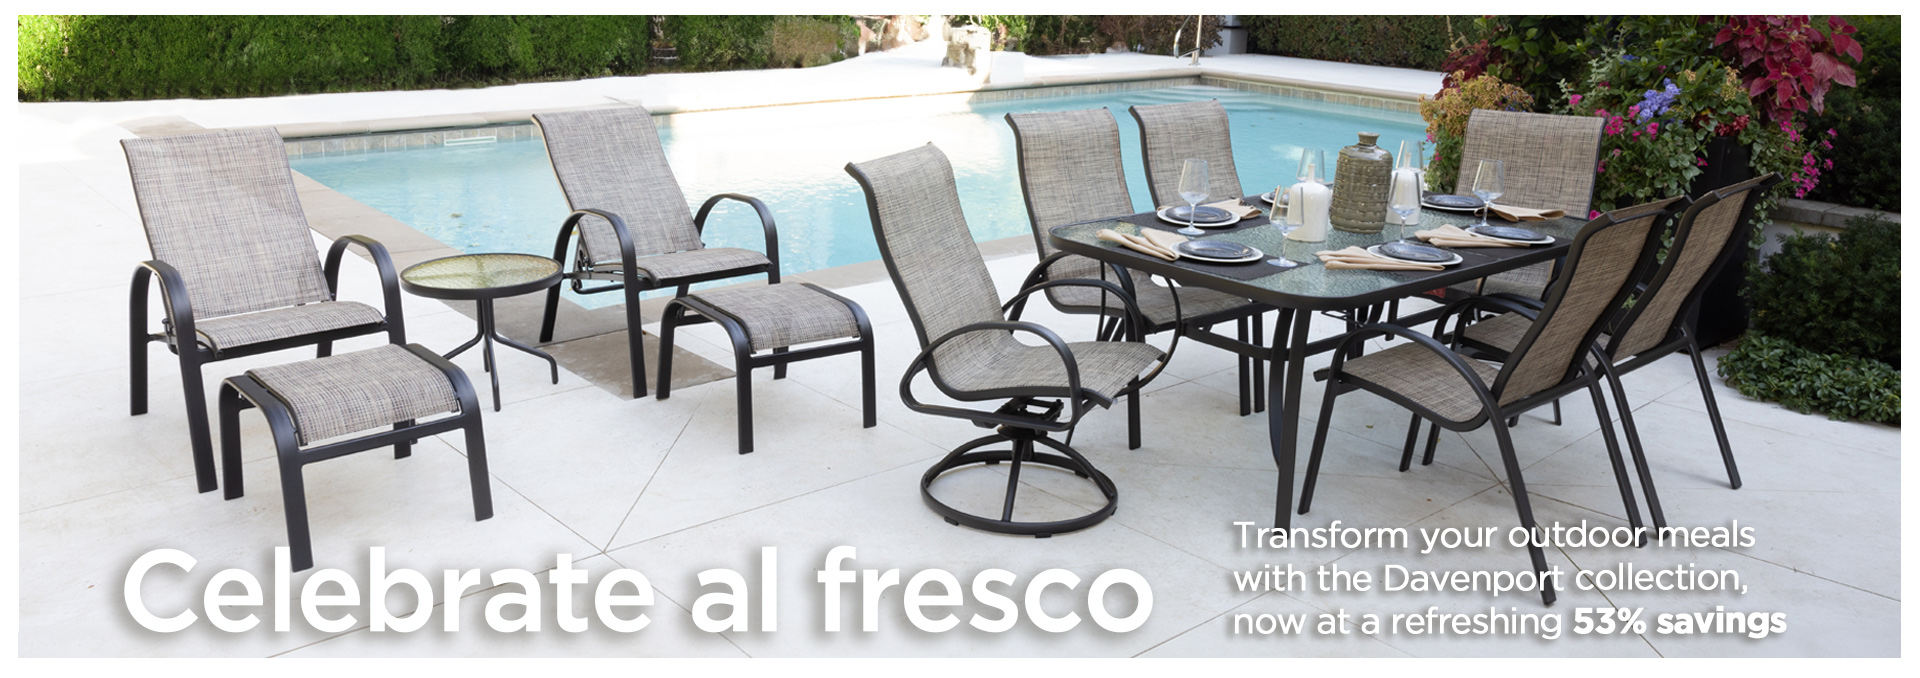 Celebrate Al Fresco with the Davenport 7 pc dining set at 53% off